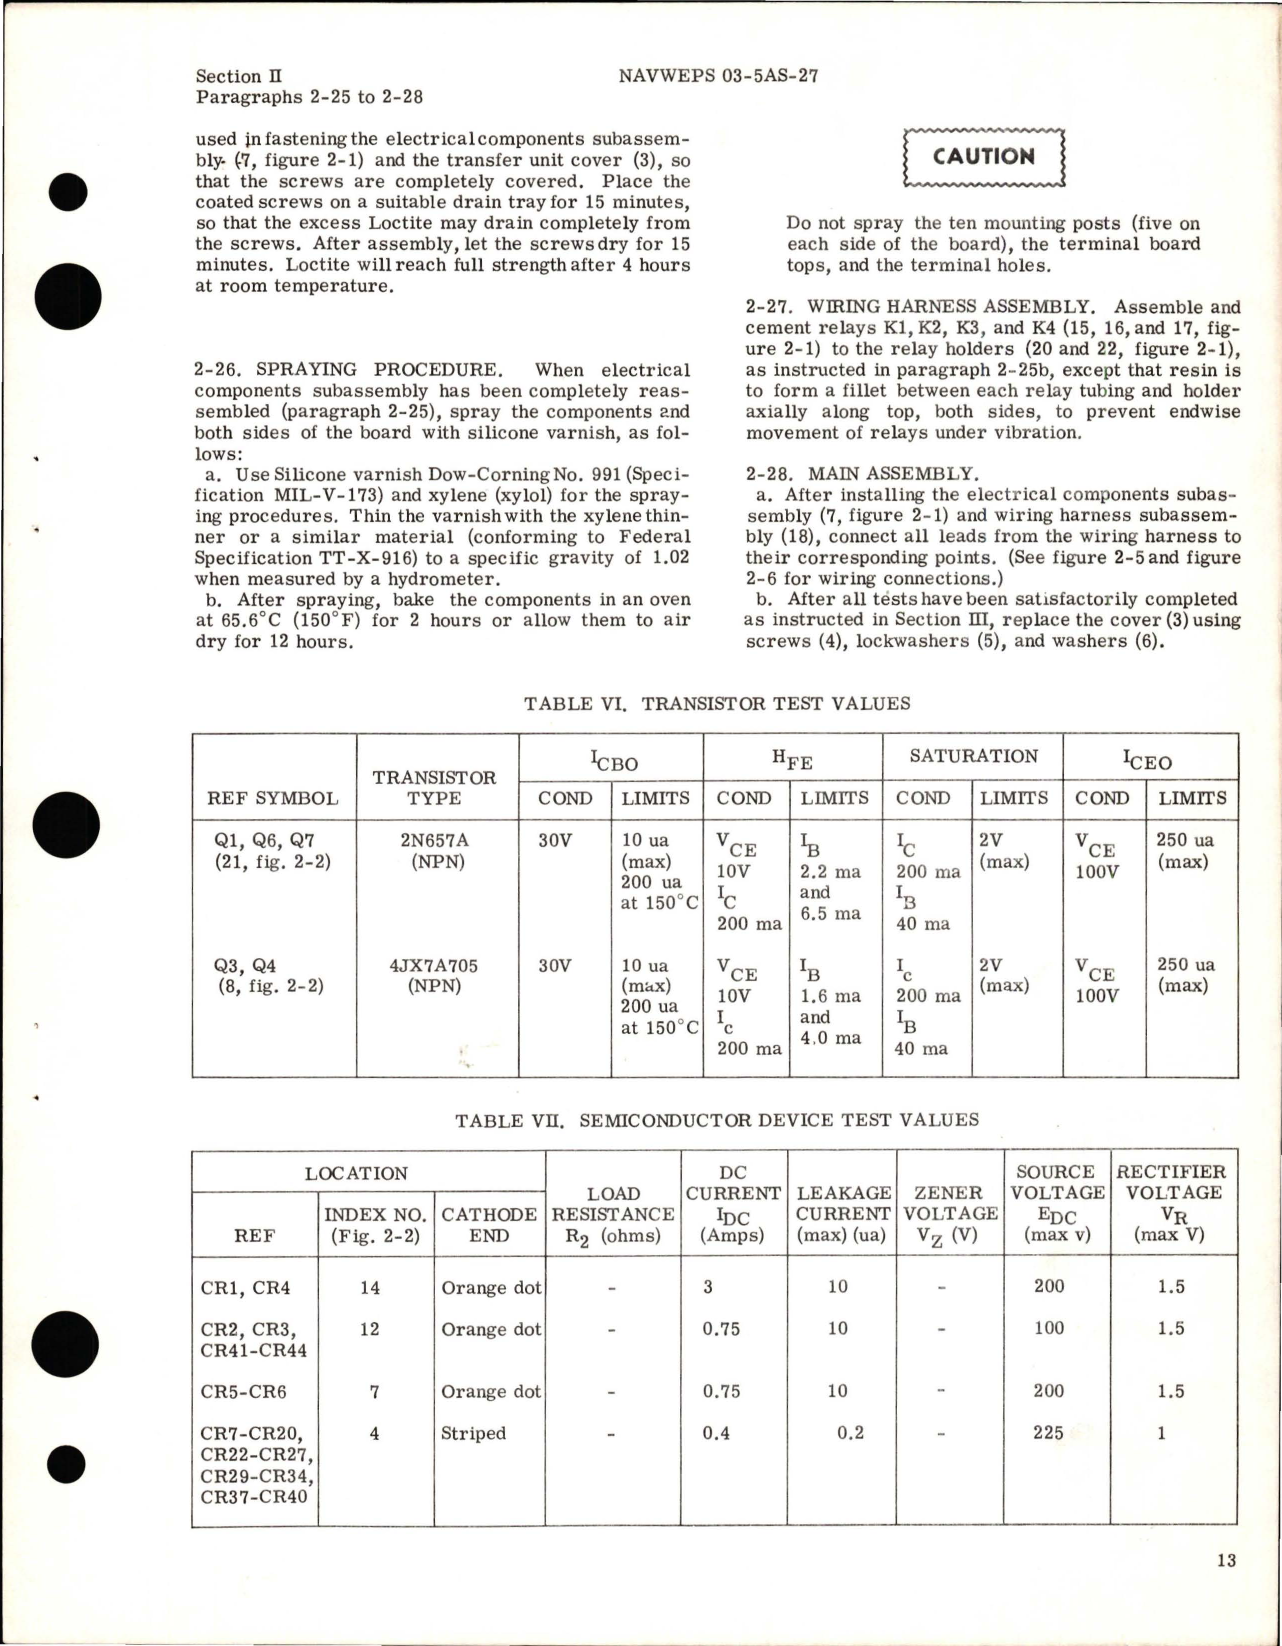 Sample page 5 from AirCorps Library document: Overhaul Instructions for Transfer Unit - Part 34B74-2-A 